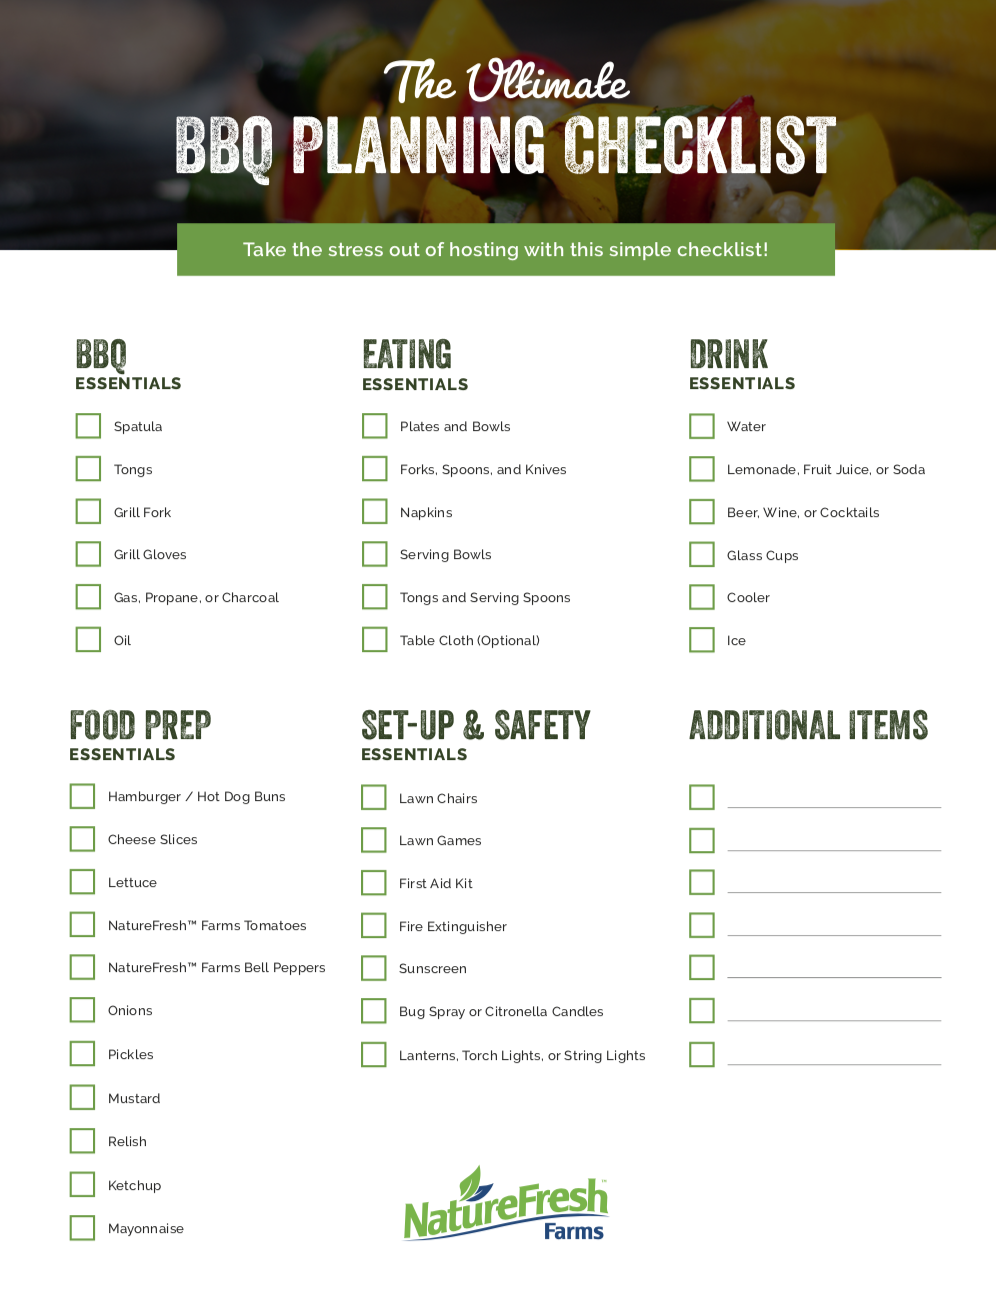 https://www.naturefresh.ca/wp-content/uploads/Ultimate-BBQ-Planning-Checklist-Shopping-List-Preview.png